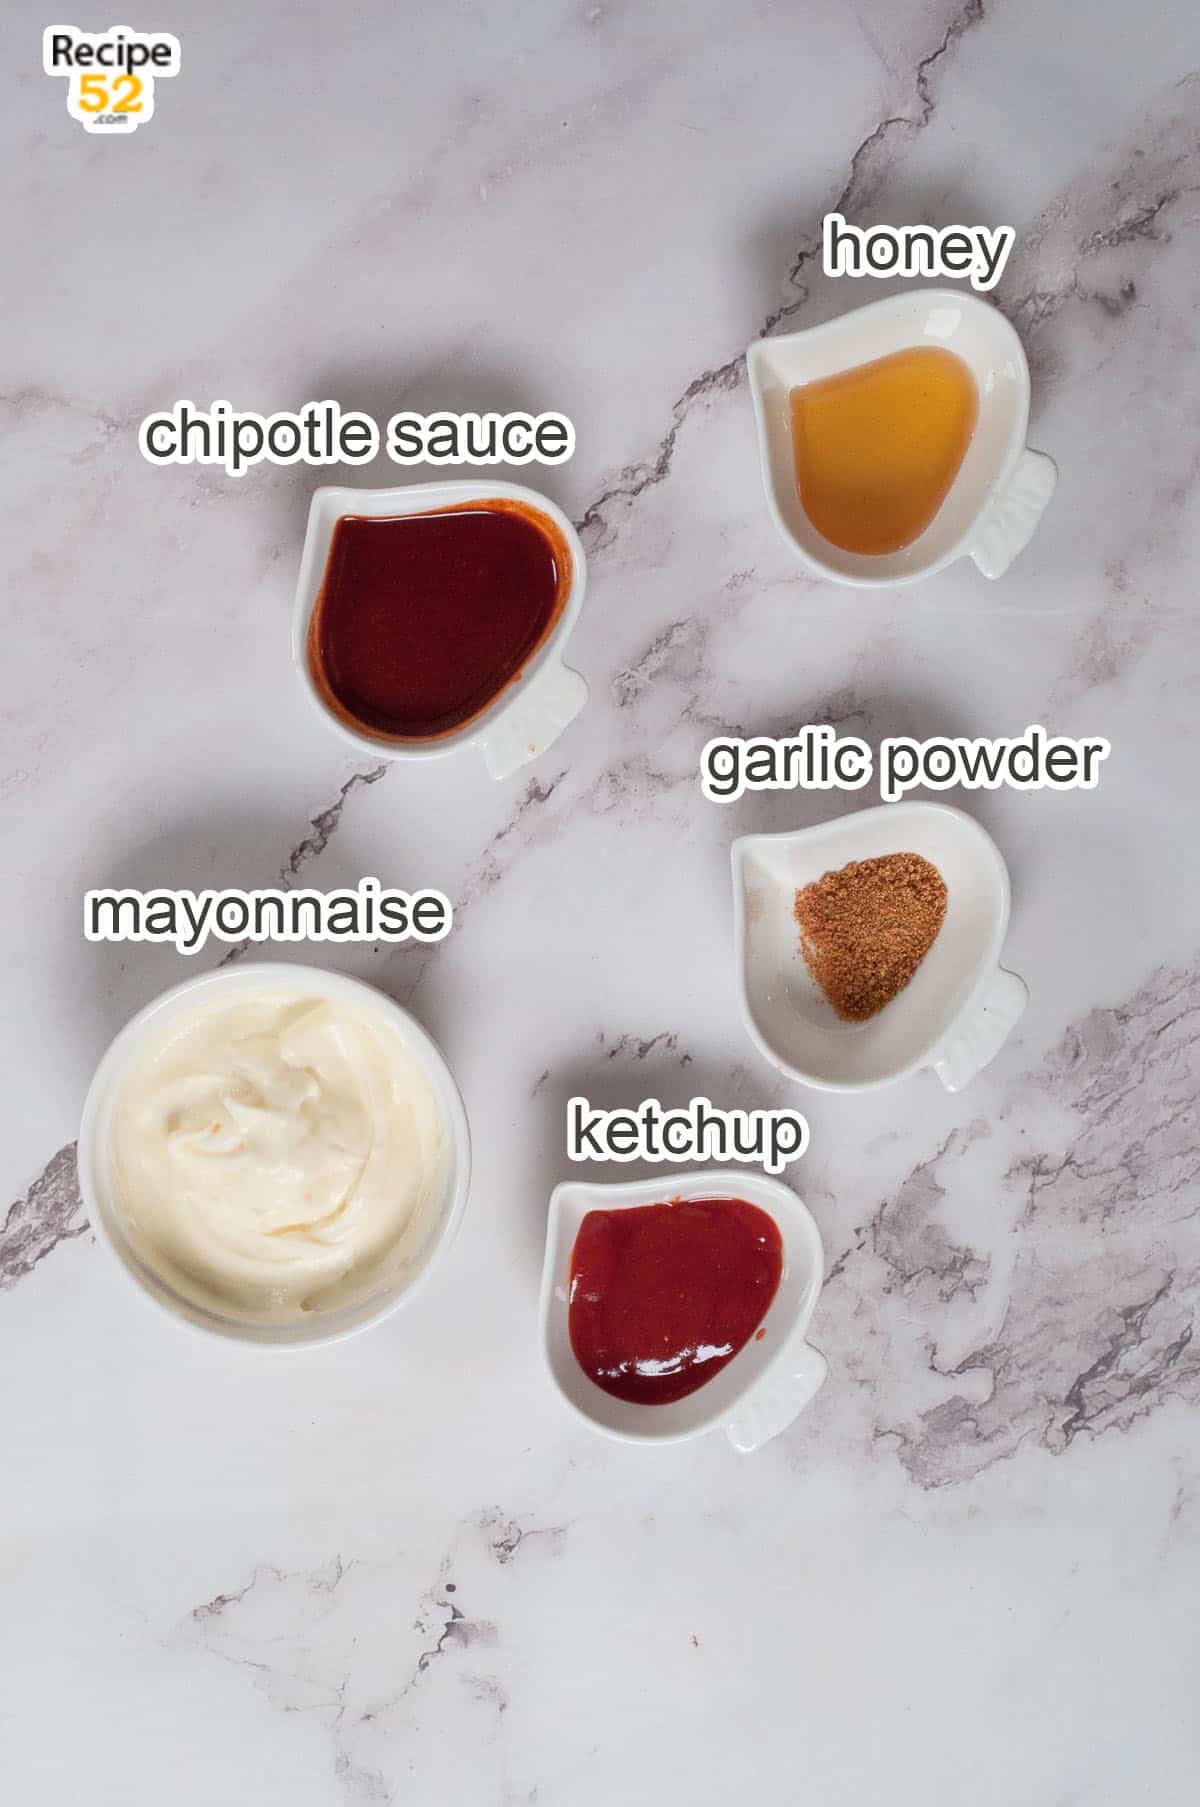 Display of ingredients for the dynamite sauce.